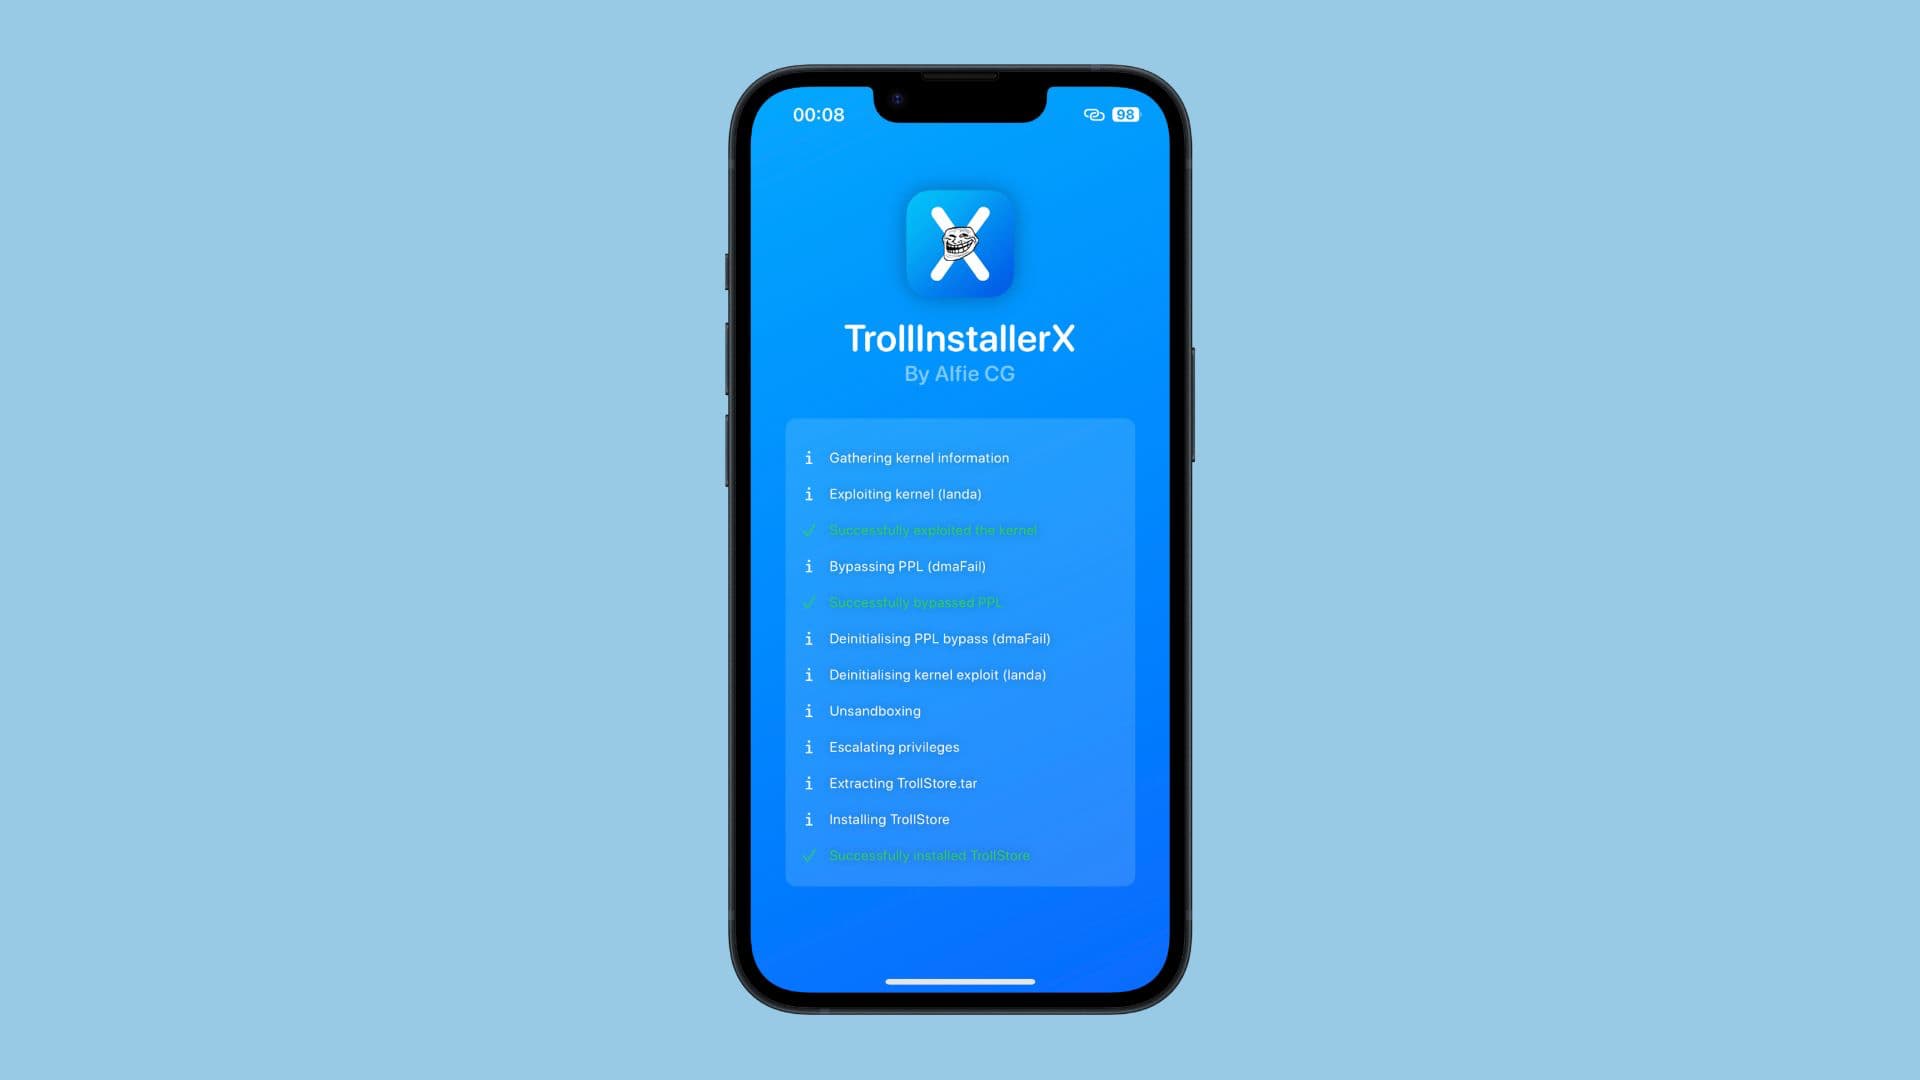 TrollInstallerX v1.0.2 finalizes support for arm64 devices running iOS 17.0 betas 1-4